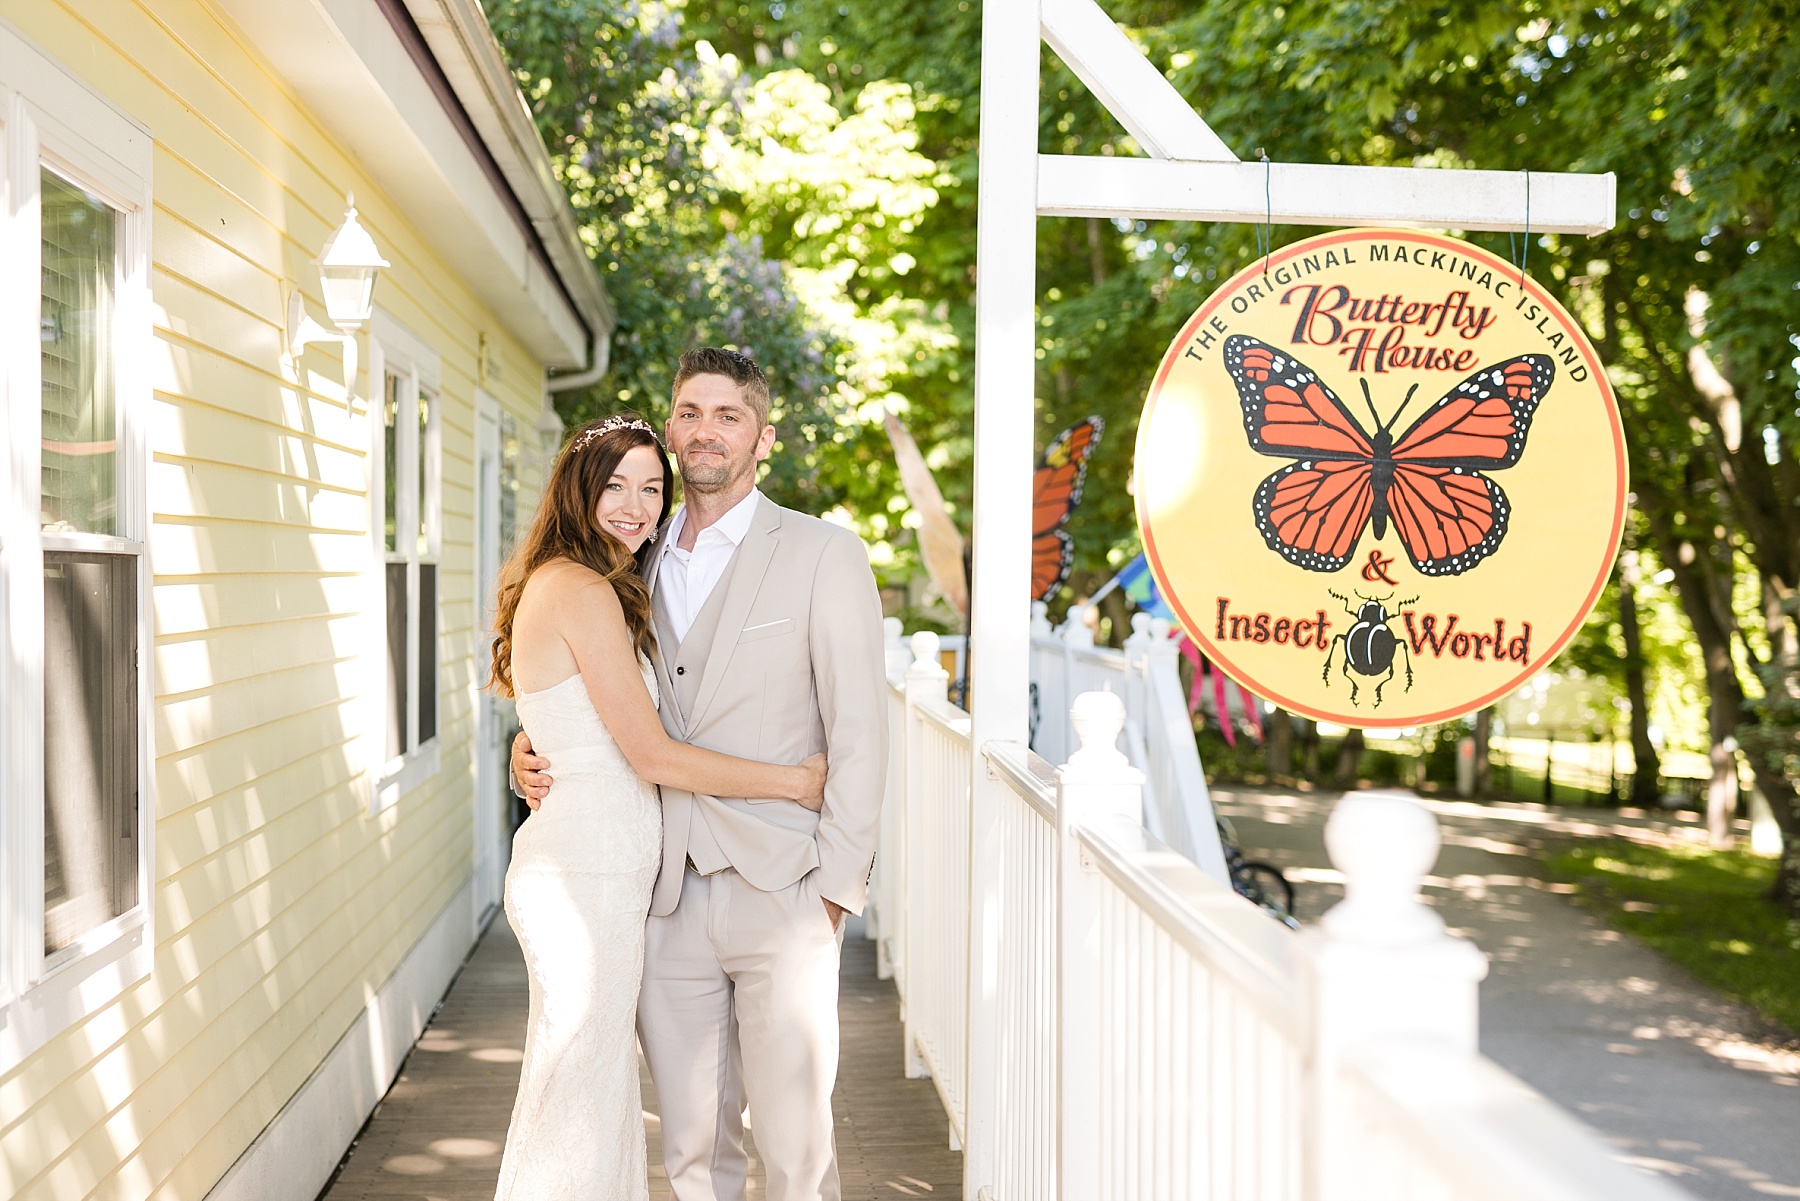 The Grand Hotel, boardwalk and beach were the perfect setting for a Mackinac Island wedding.